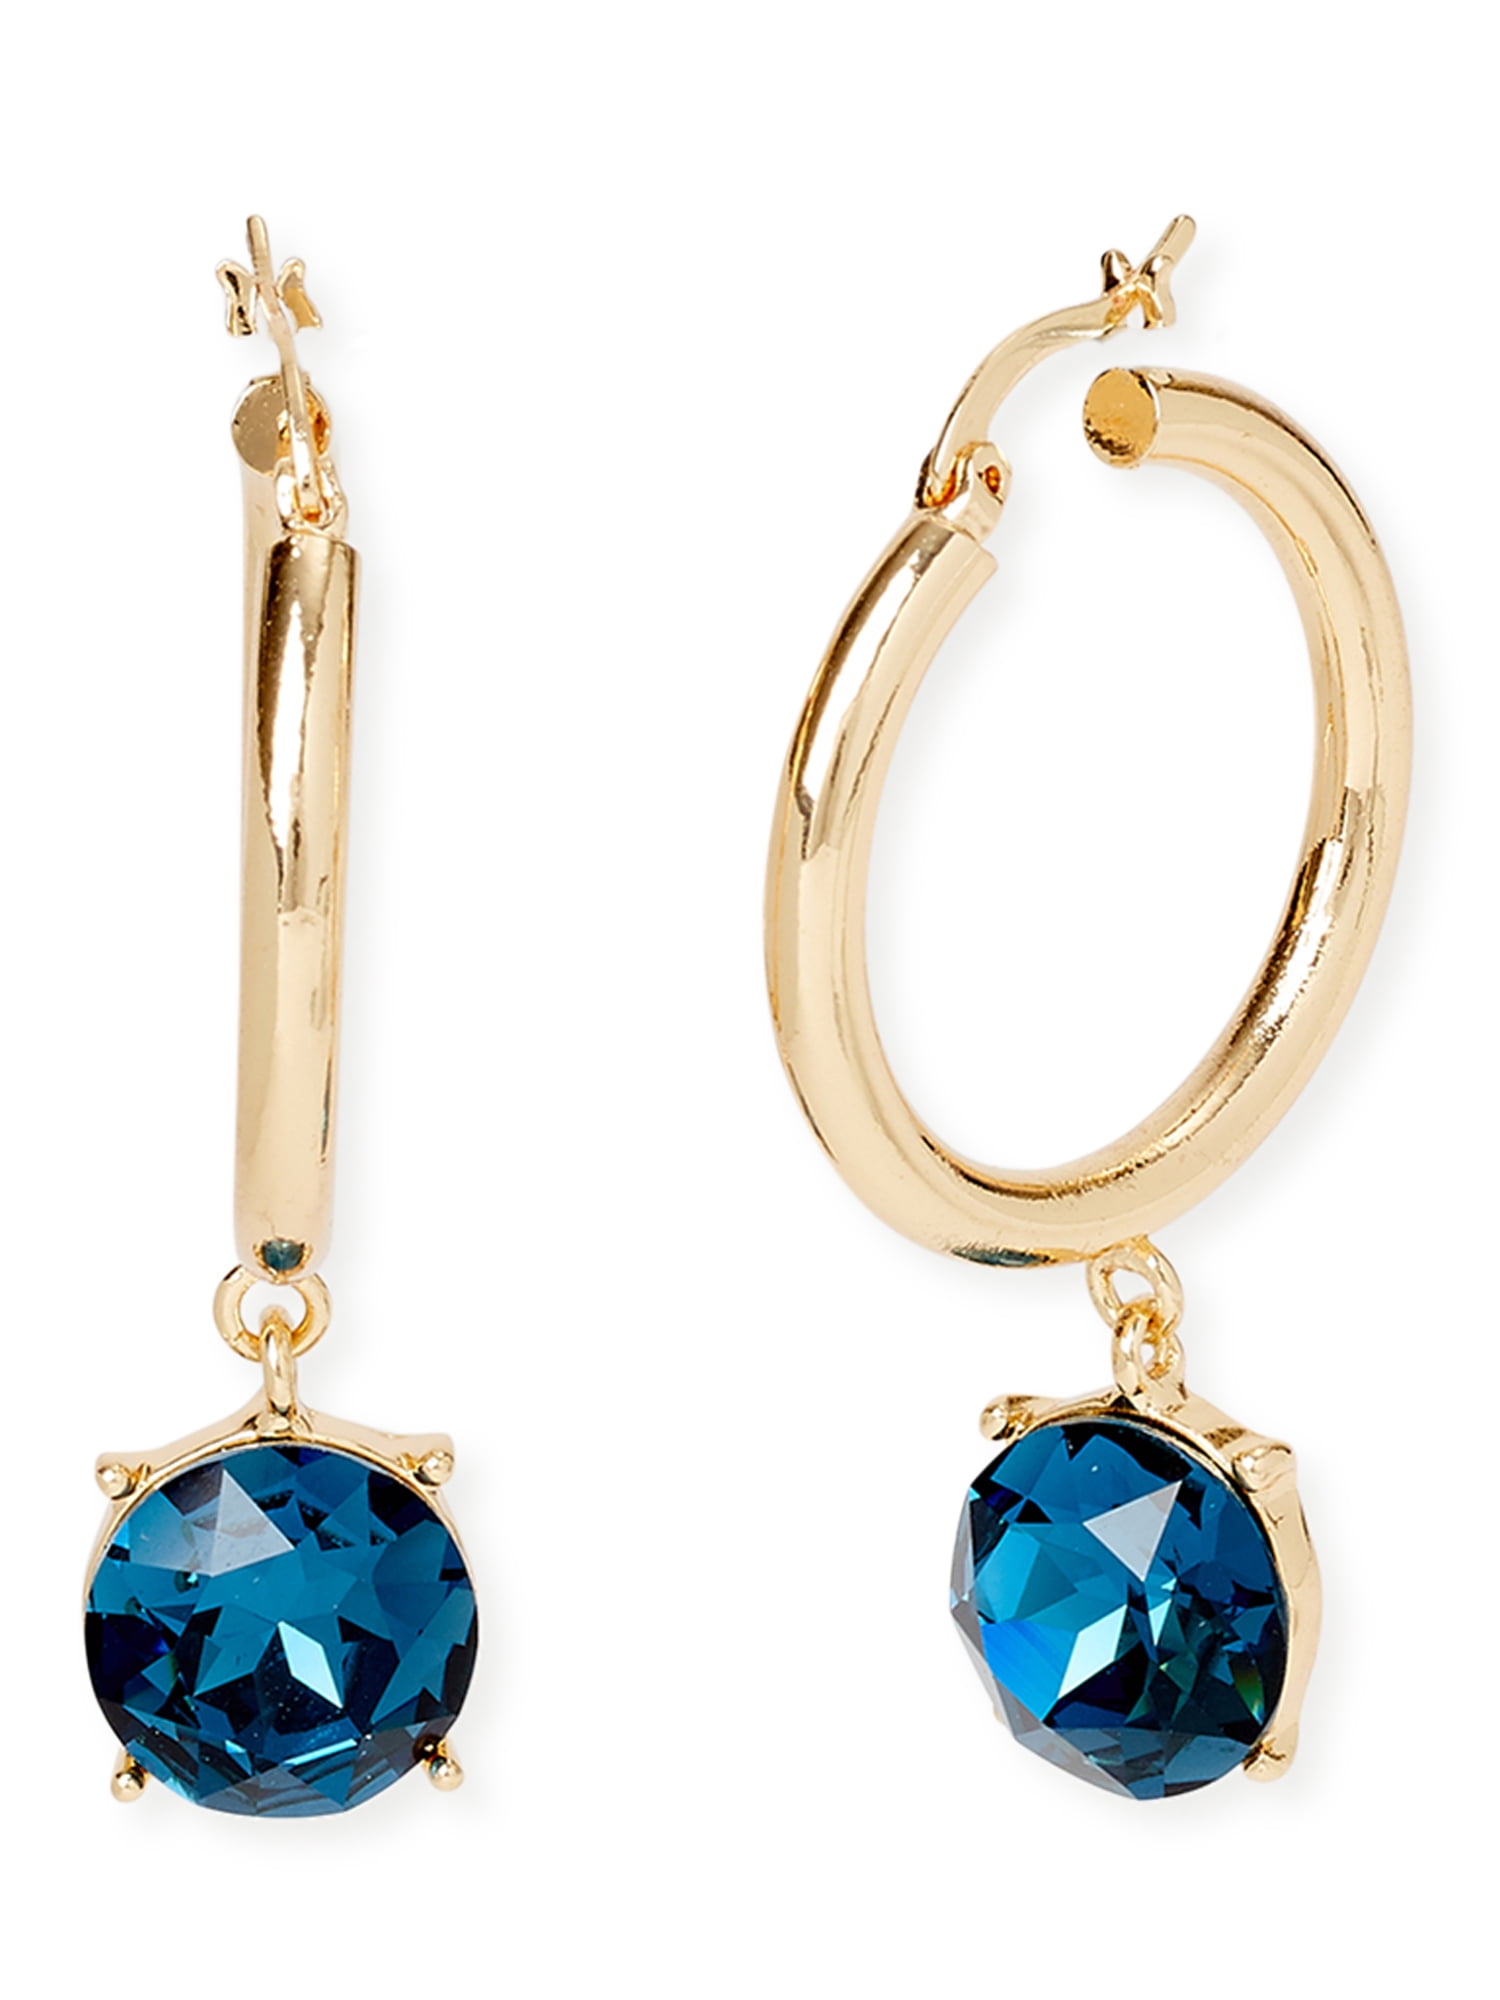 Blue glass earring with gold colored metal accents and hook